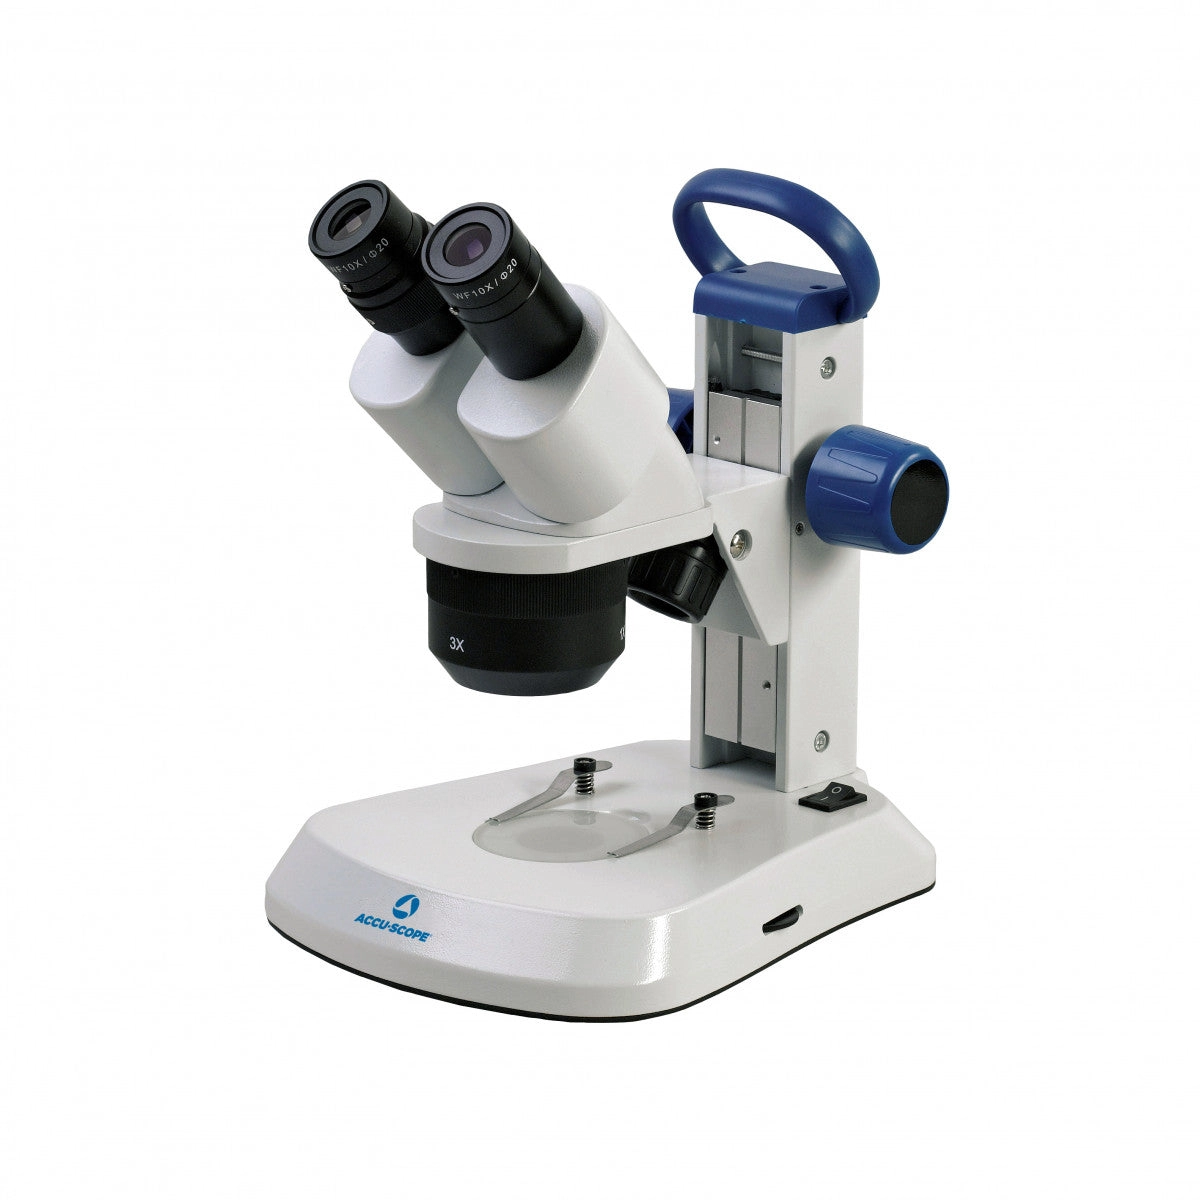 Accu-Scope EXS-210 Stereo Microscope with 1X and 3X Objectives